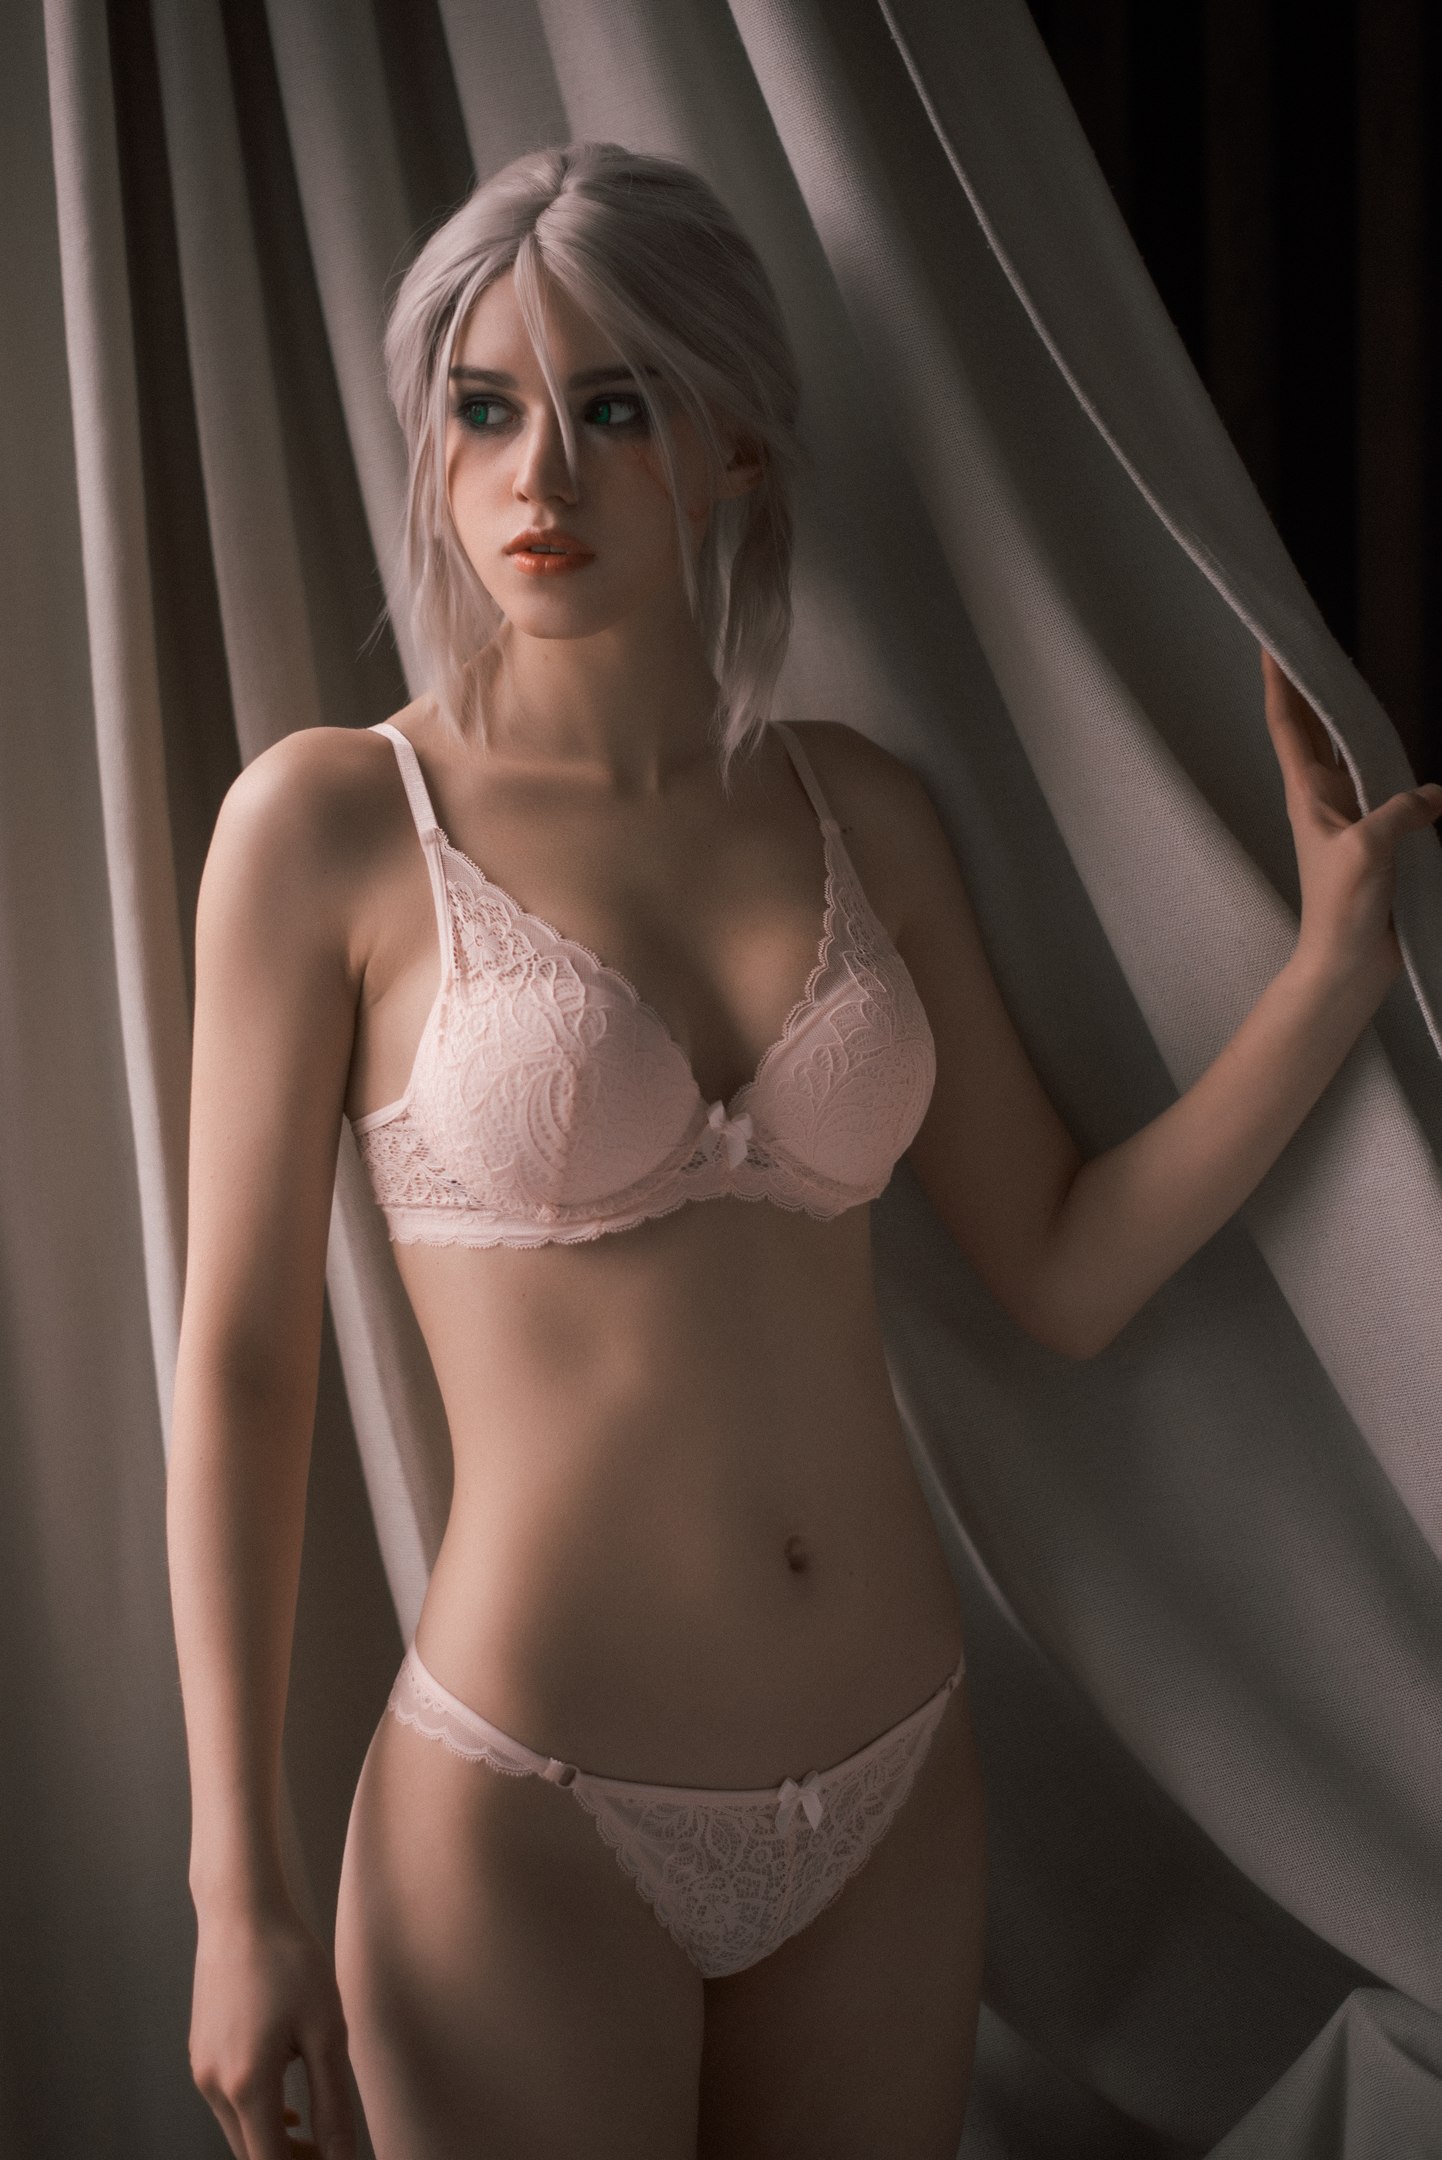 People 1442x2160 women model cosplay Shirogane Sama The Witcher video games video game characters lingerie belly parted lips cleavage looking away Cirilla Fiona Elen Riannon white lingerie bra panties white panties white bra underwear lipstick